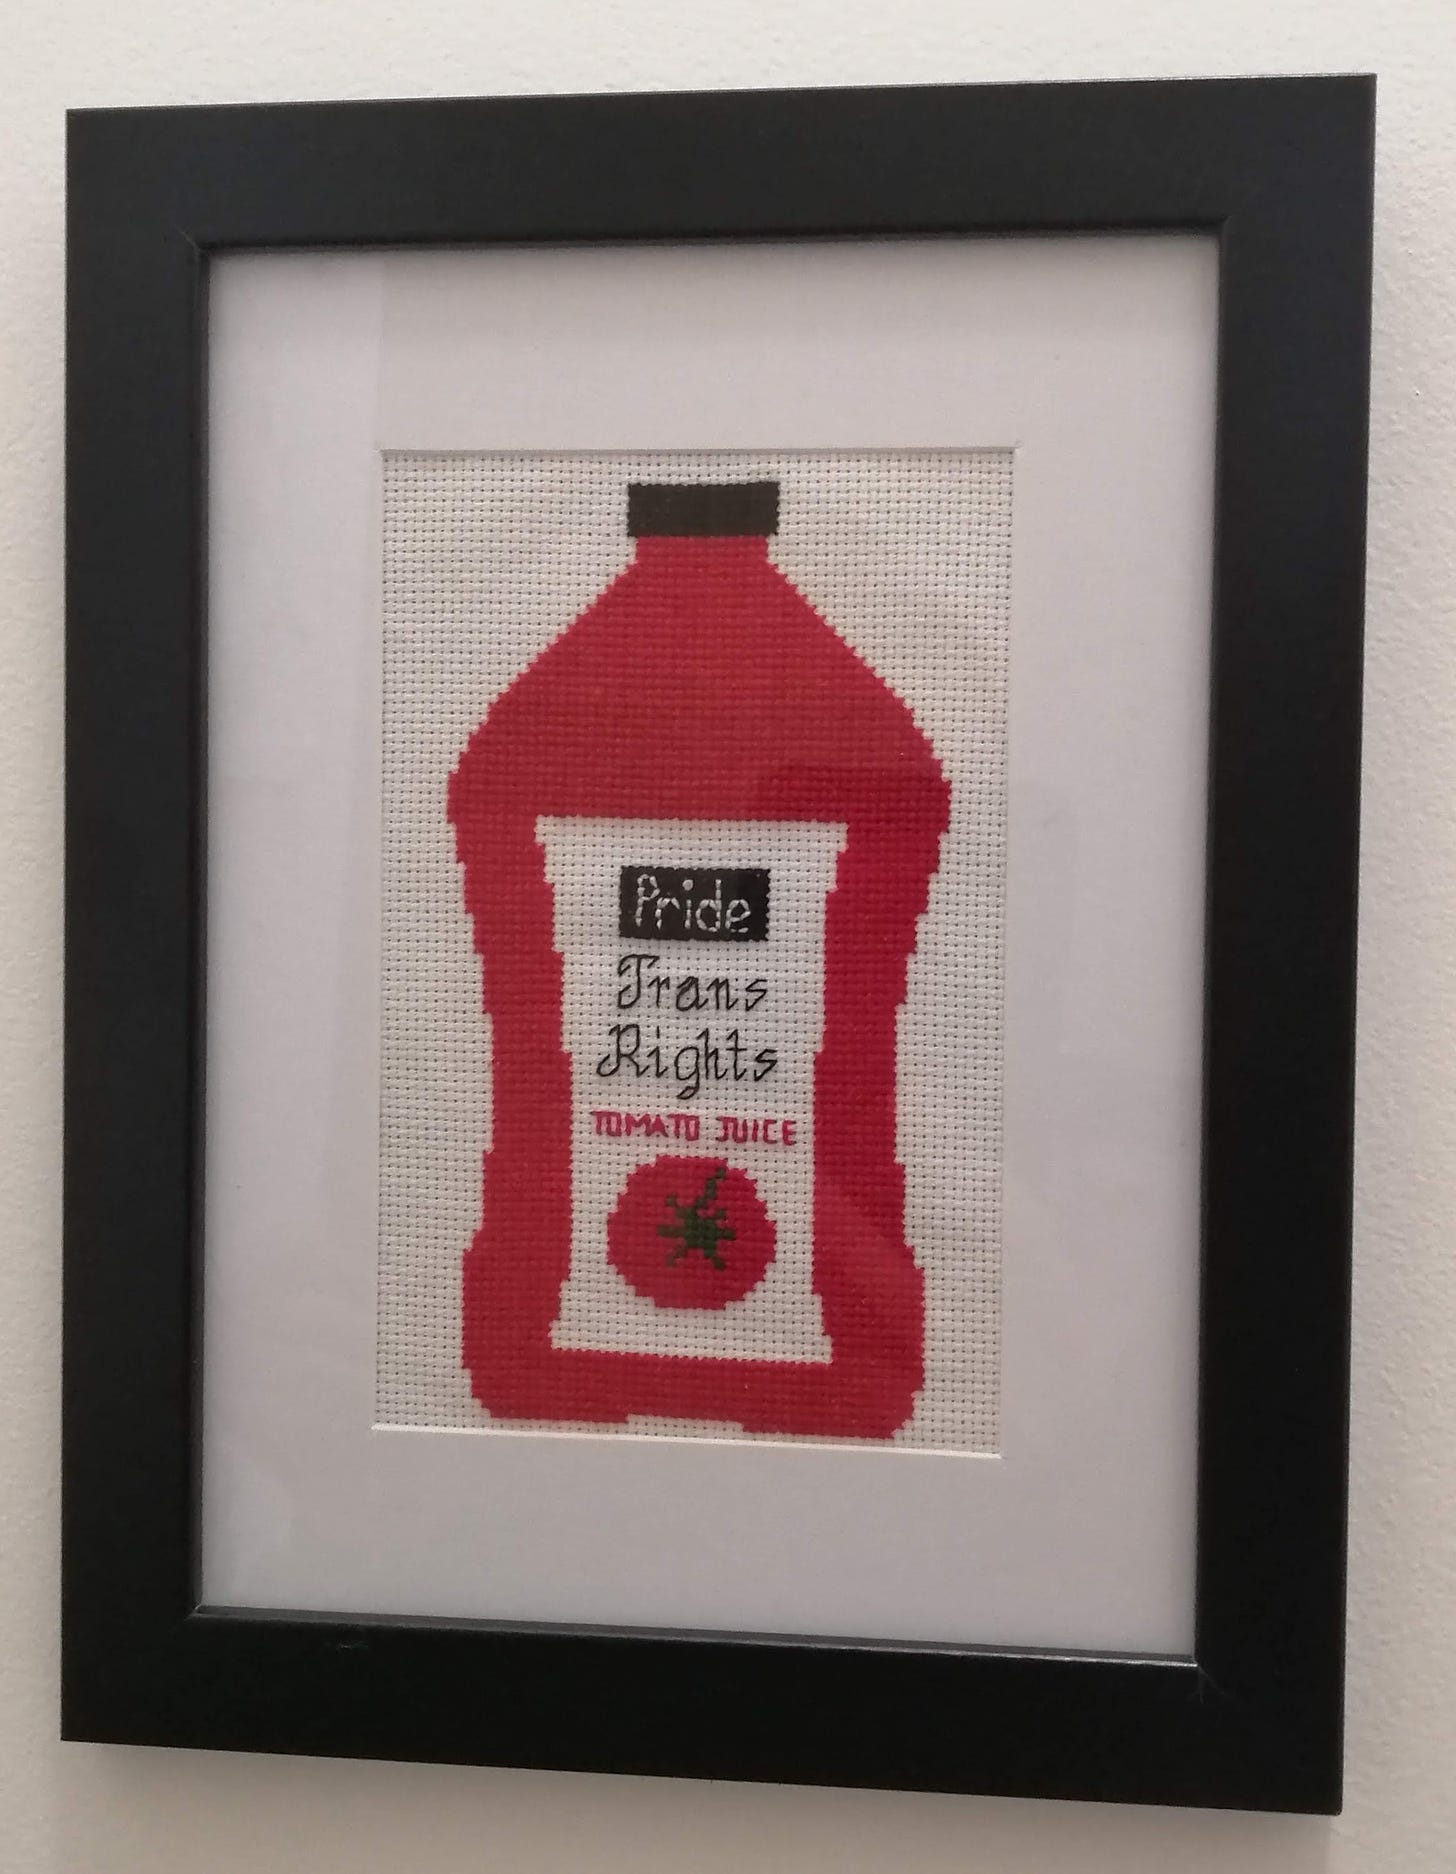 Cross stitch of what looks like a Keri brand tomato juice bottle but the brand is Pride and it says trans rights tomato juice. In a black frame with white mat.